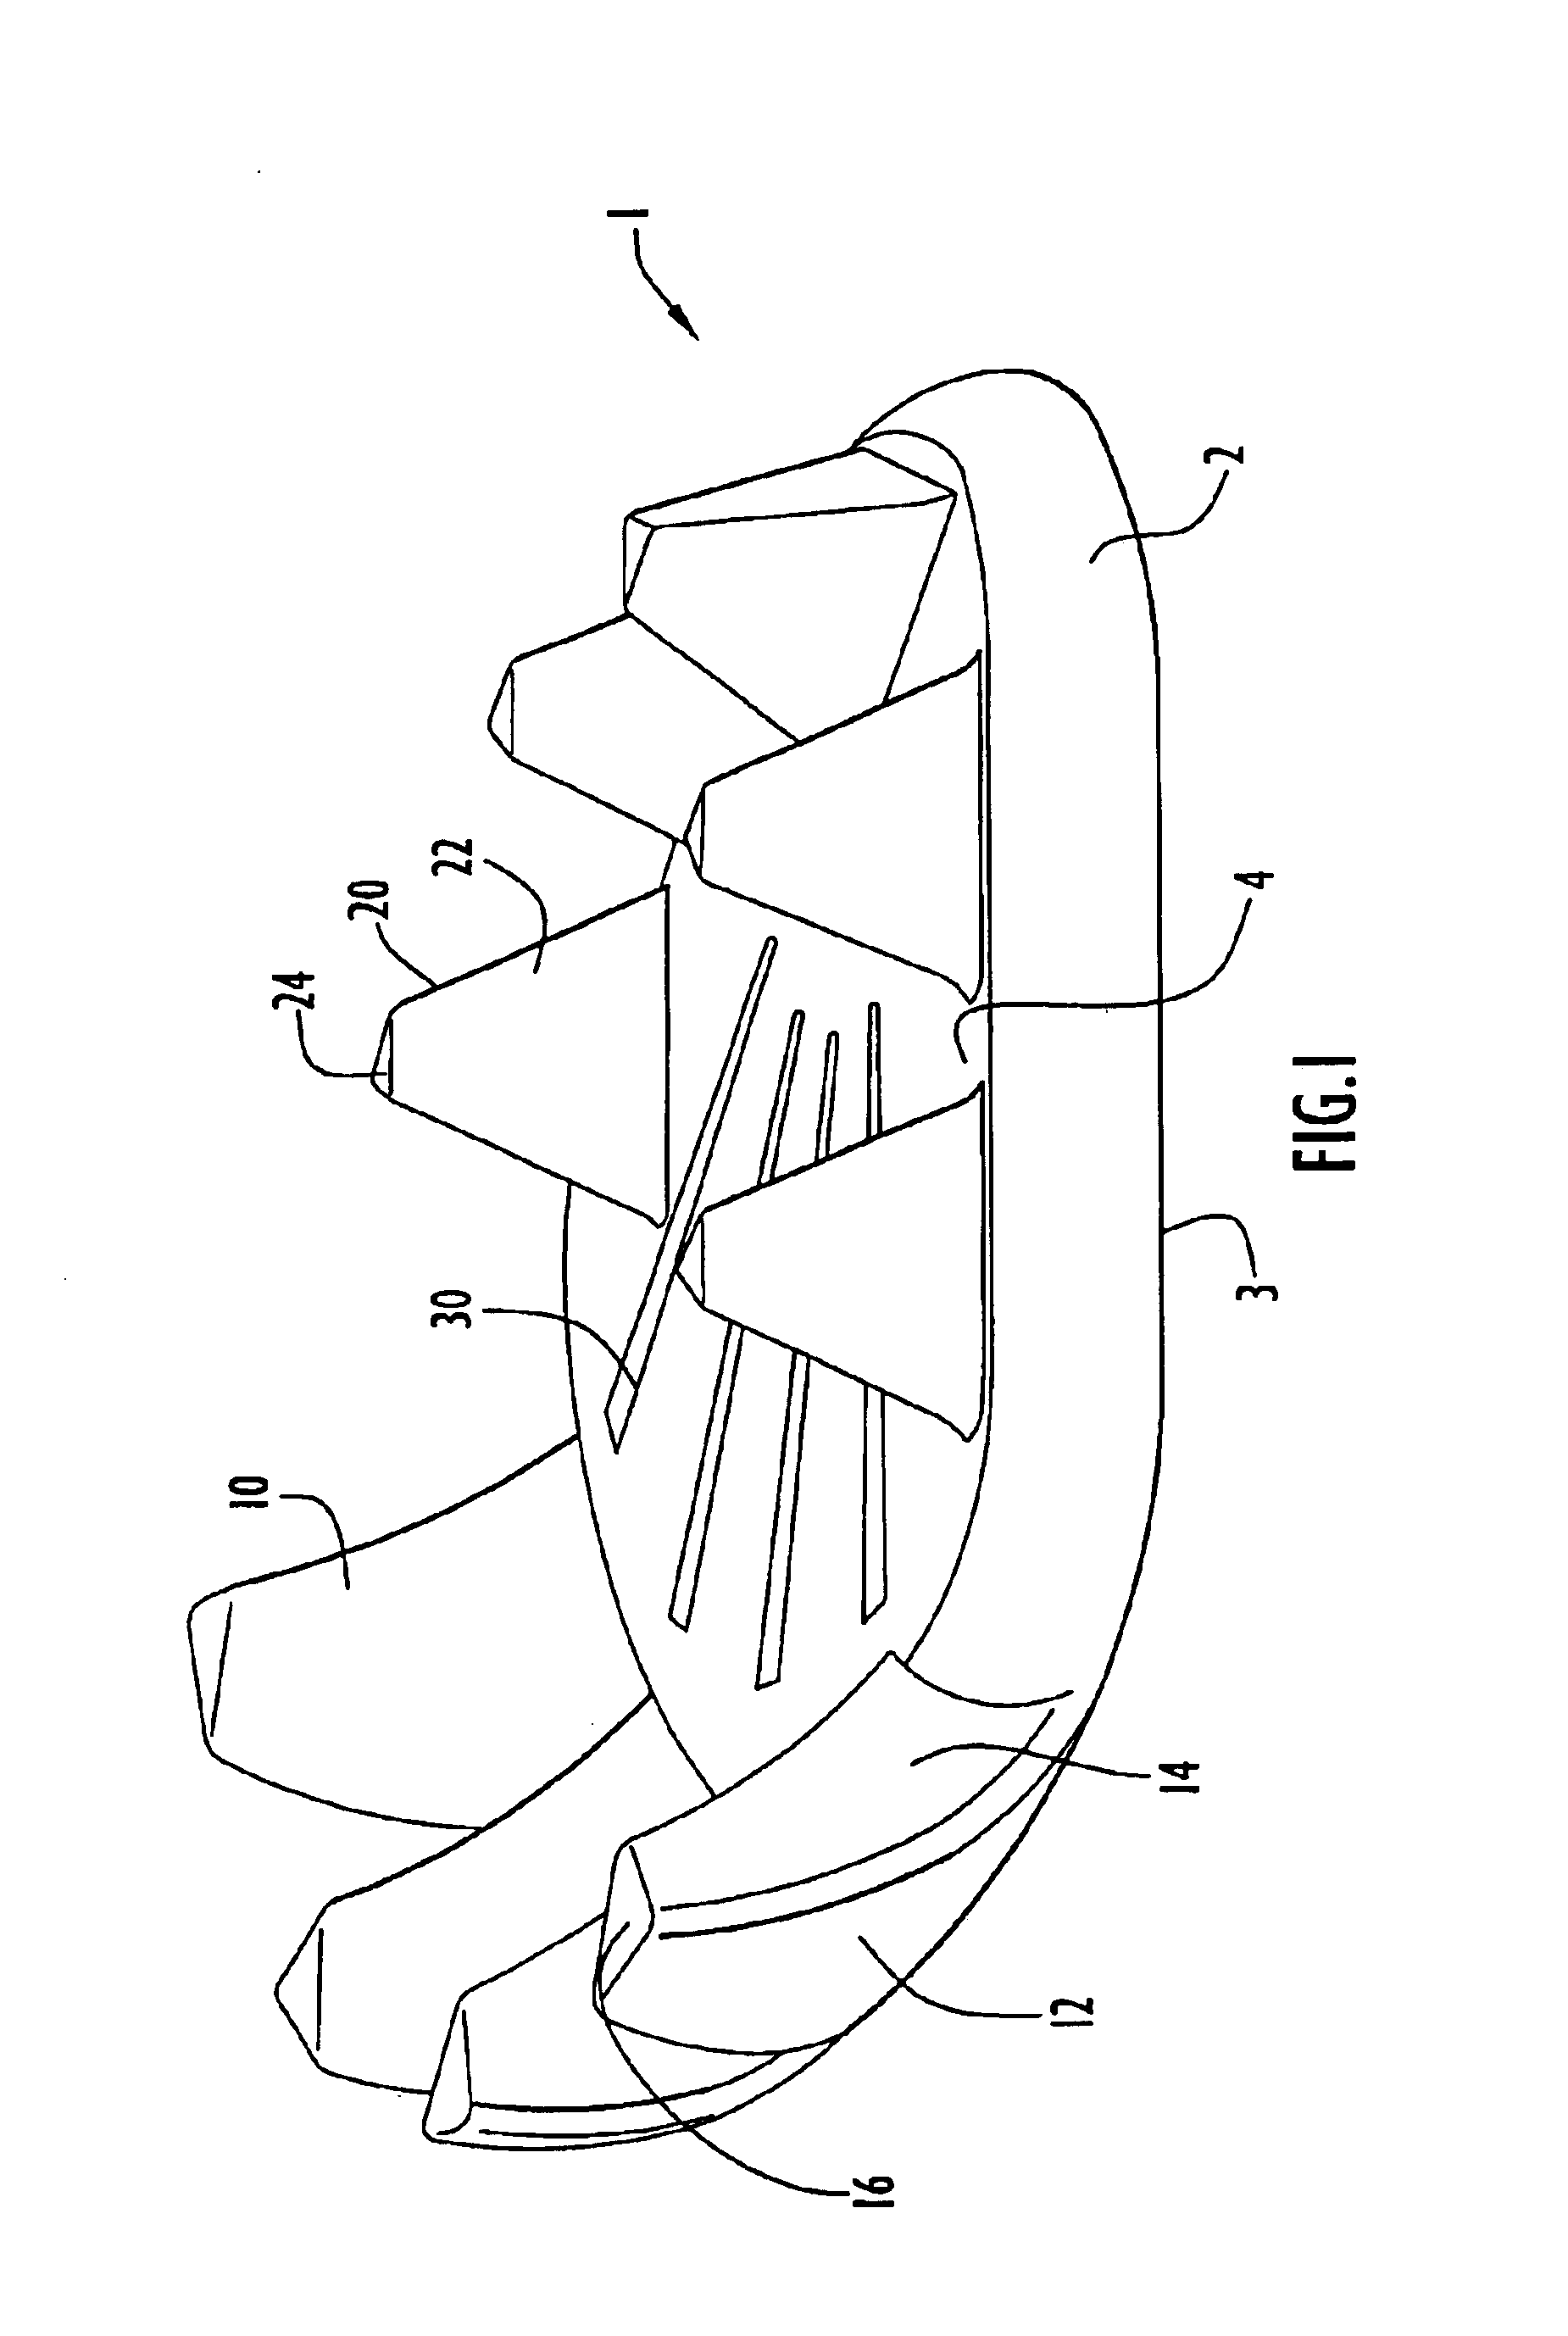 Indexable shoe cleat with improved traction